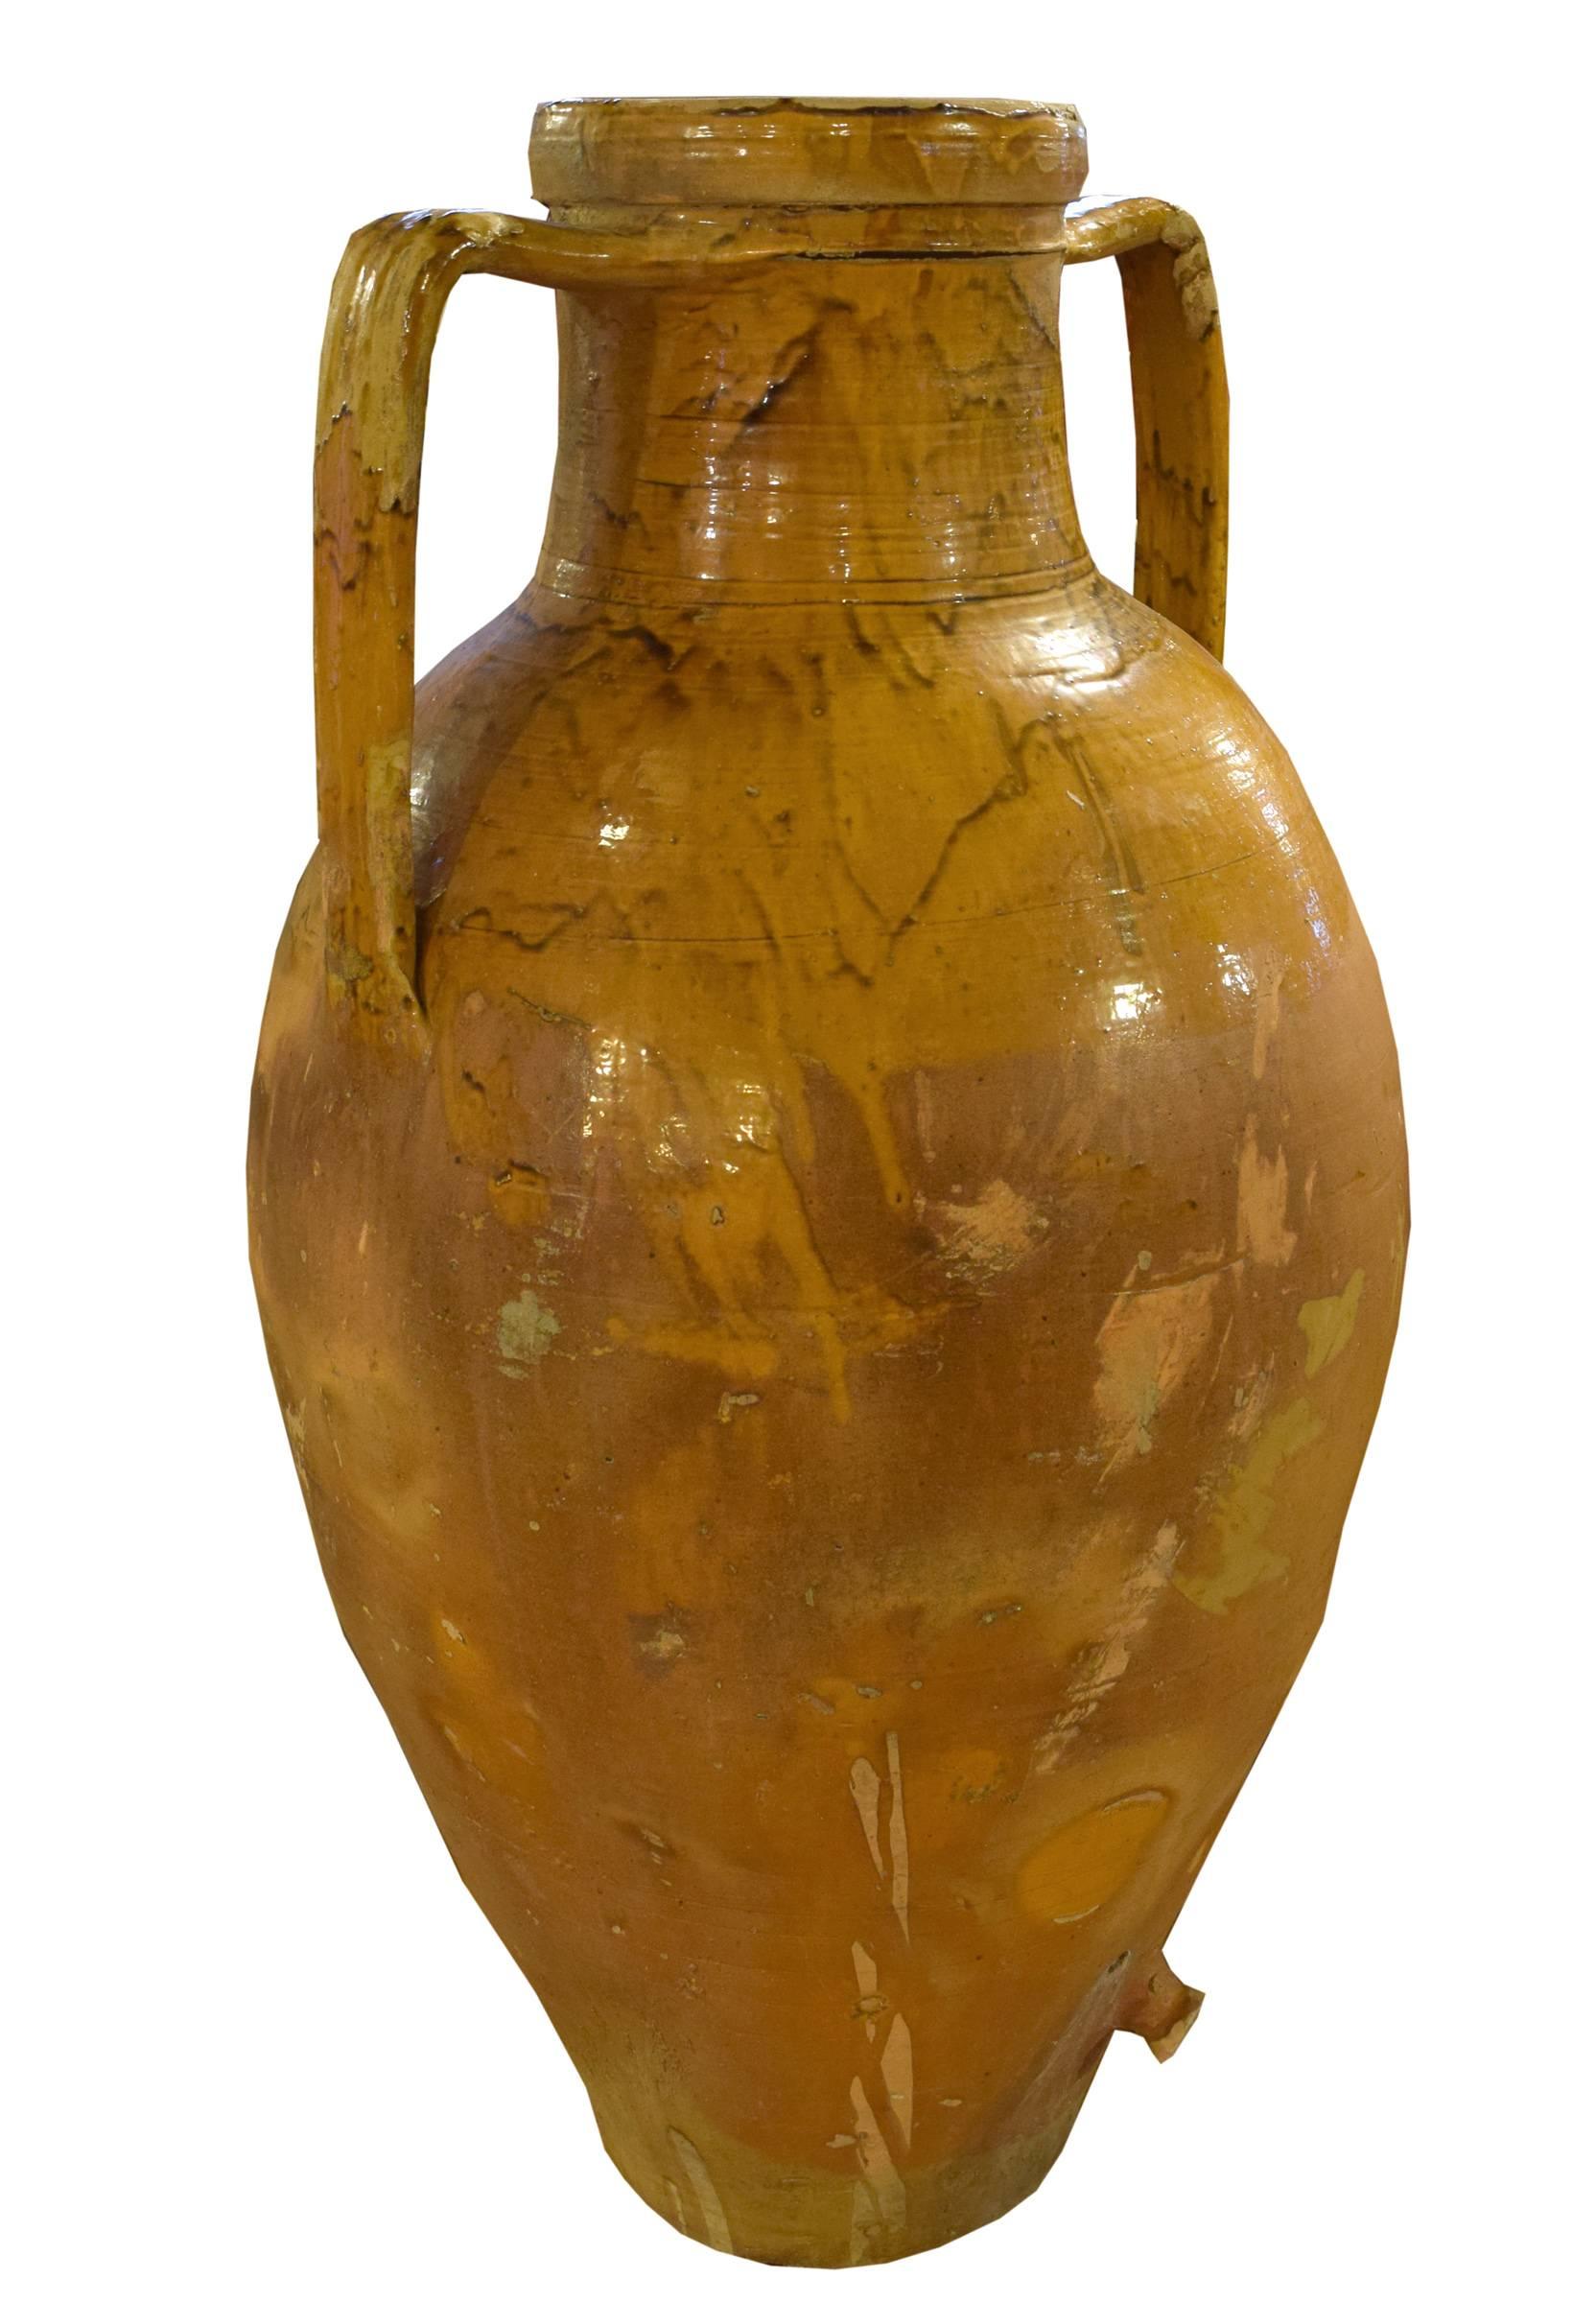 A rare 19th century terracotta olive oil jug from Italy. This jug has two sturdy handles, a beautiful glaze and a spout at the bottom.

Three others available as well.
 